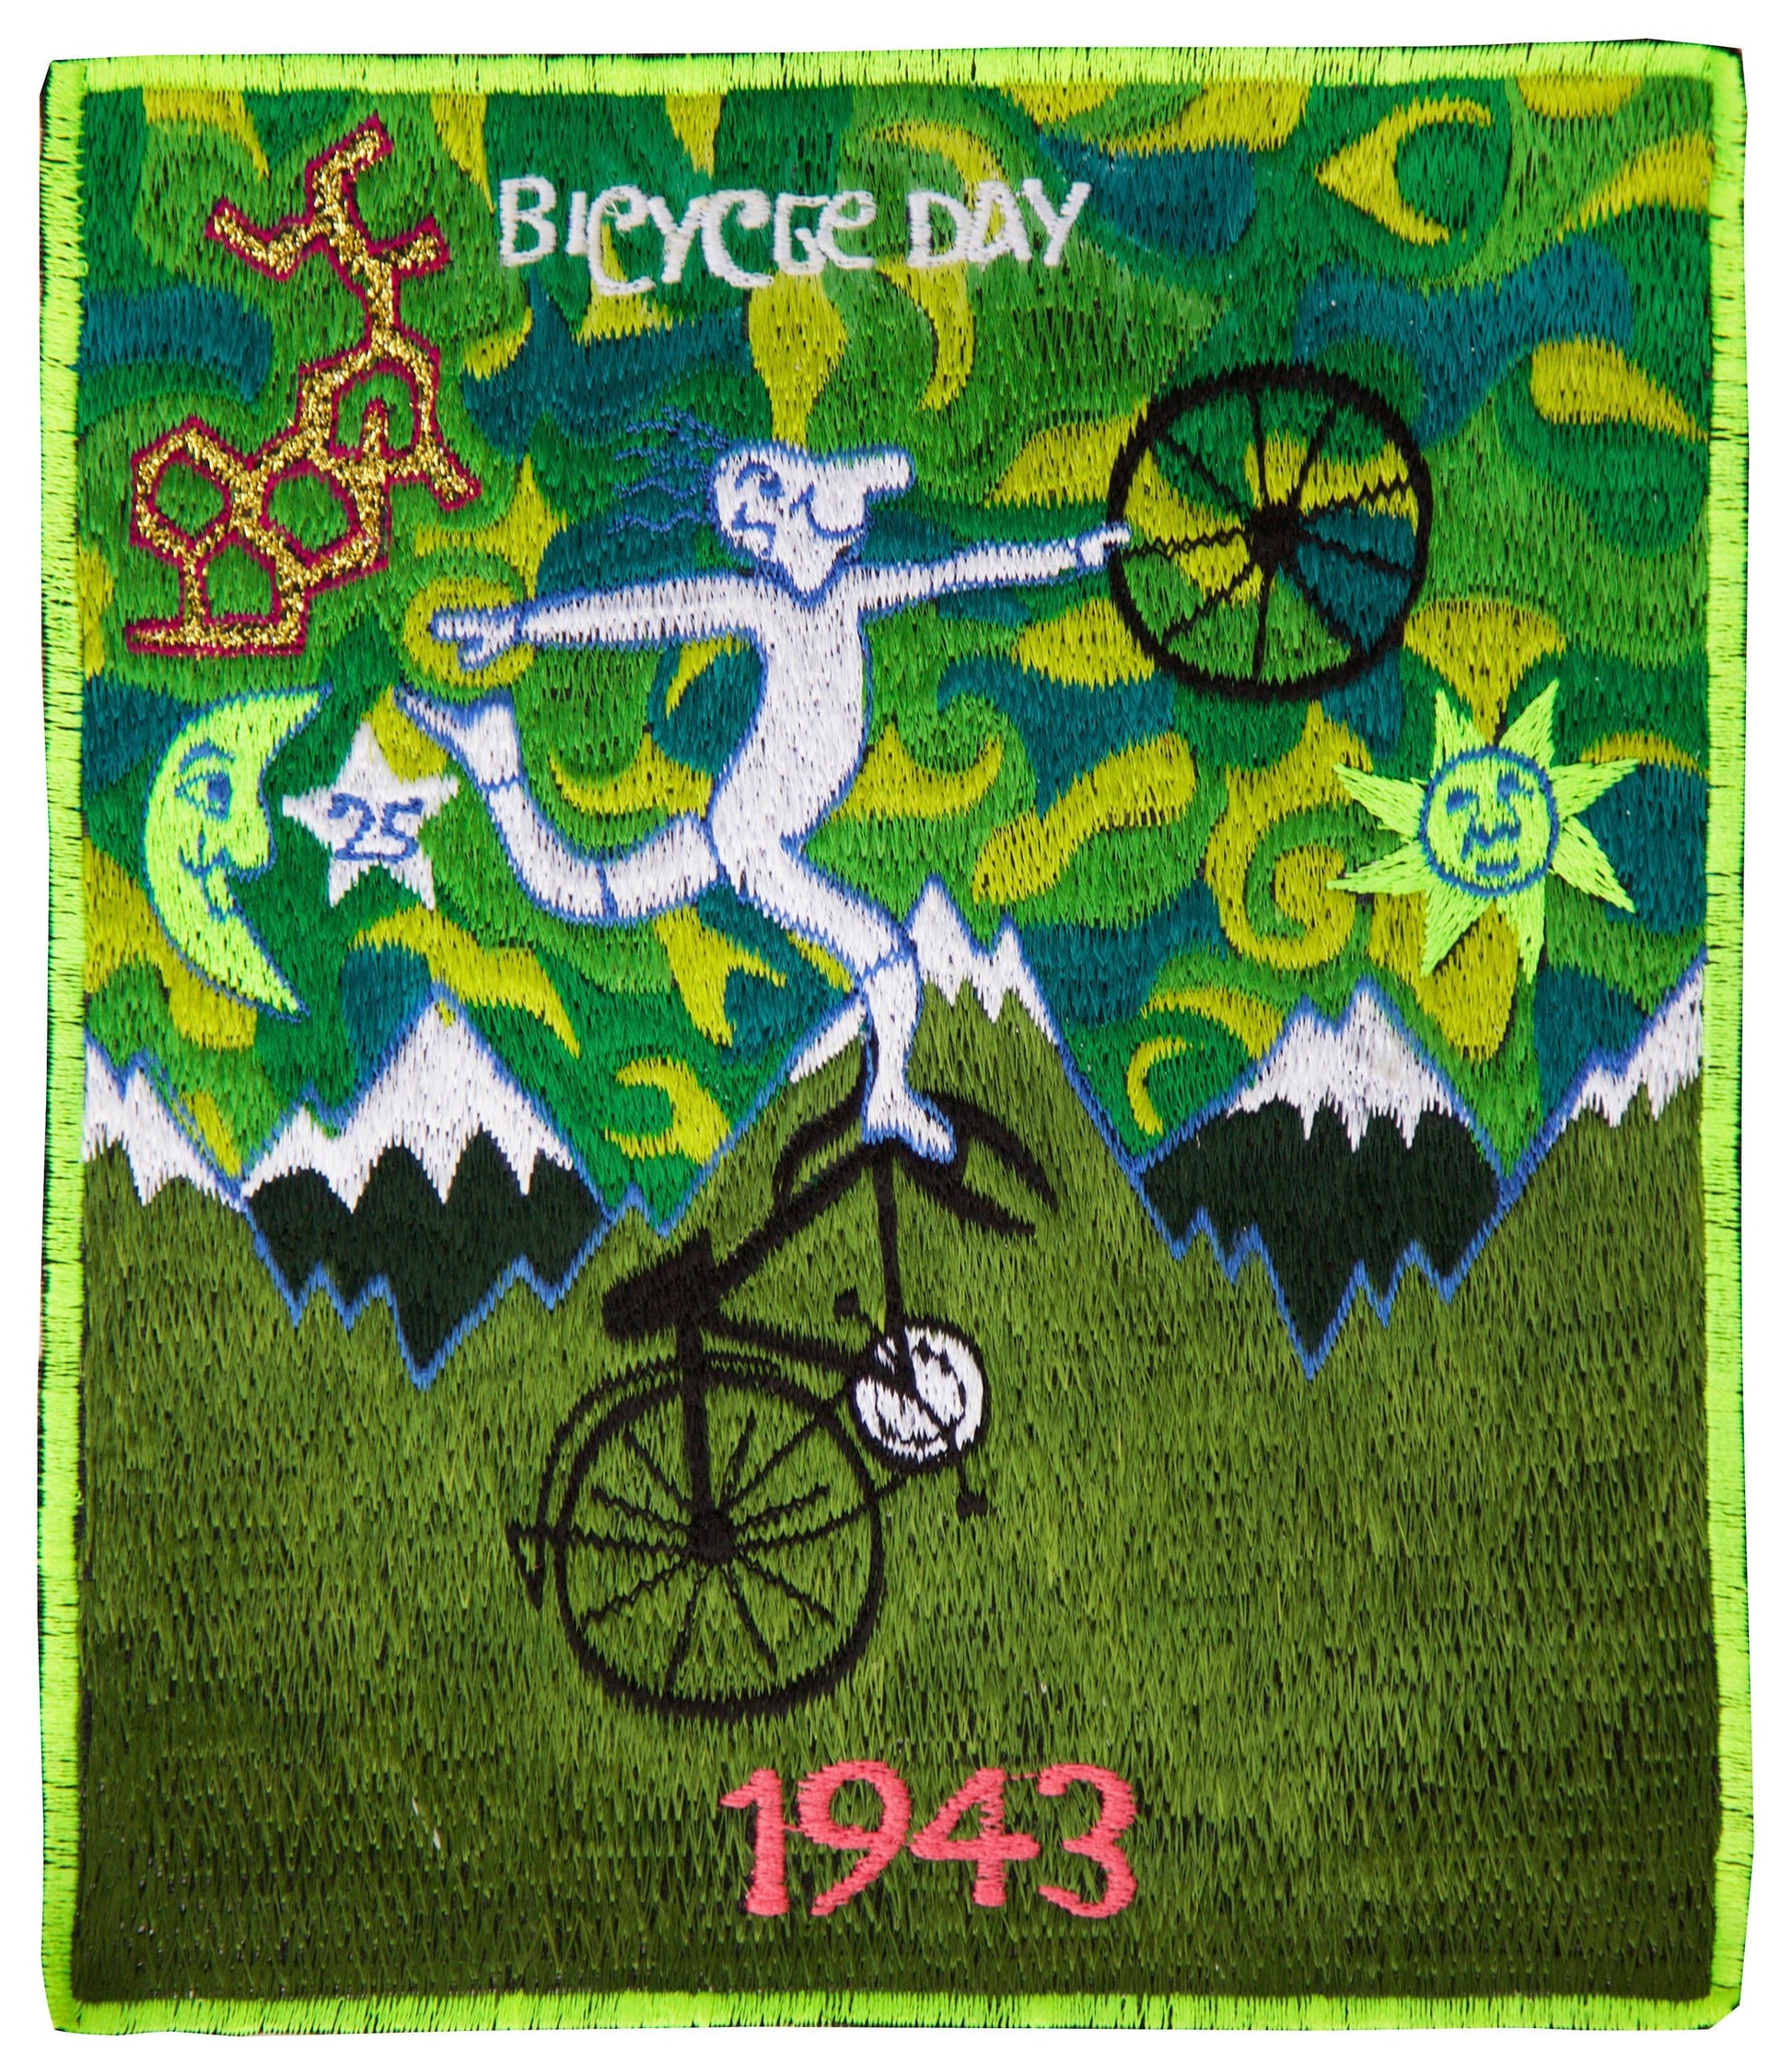 Green Bicycle Day Patch Psychedelic Dr. Albert Hofmann discovery of LSD vintage artwork Timothy Leary acid blotter art Bicycleday embroidery